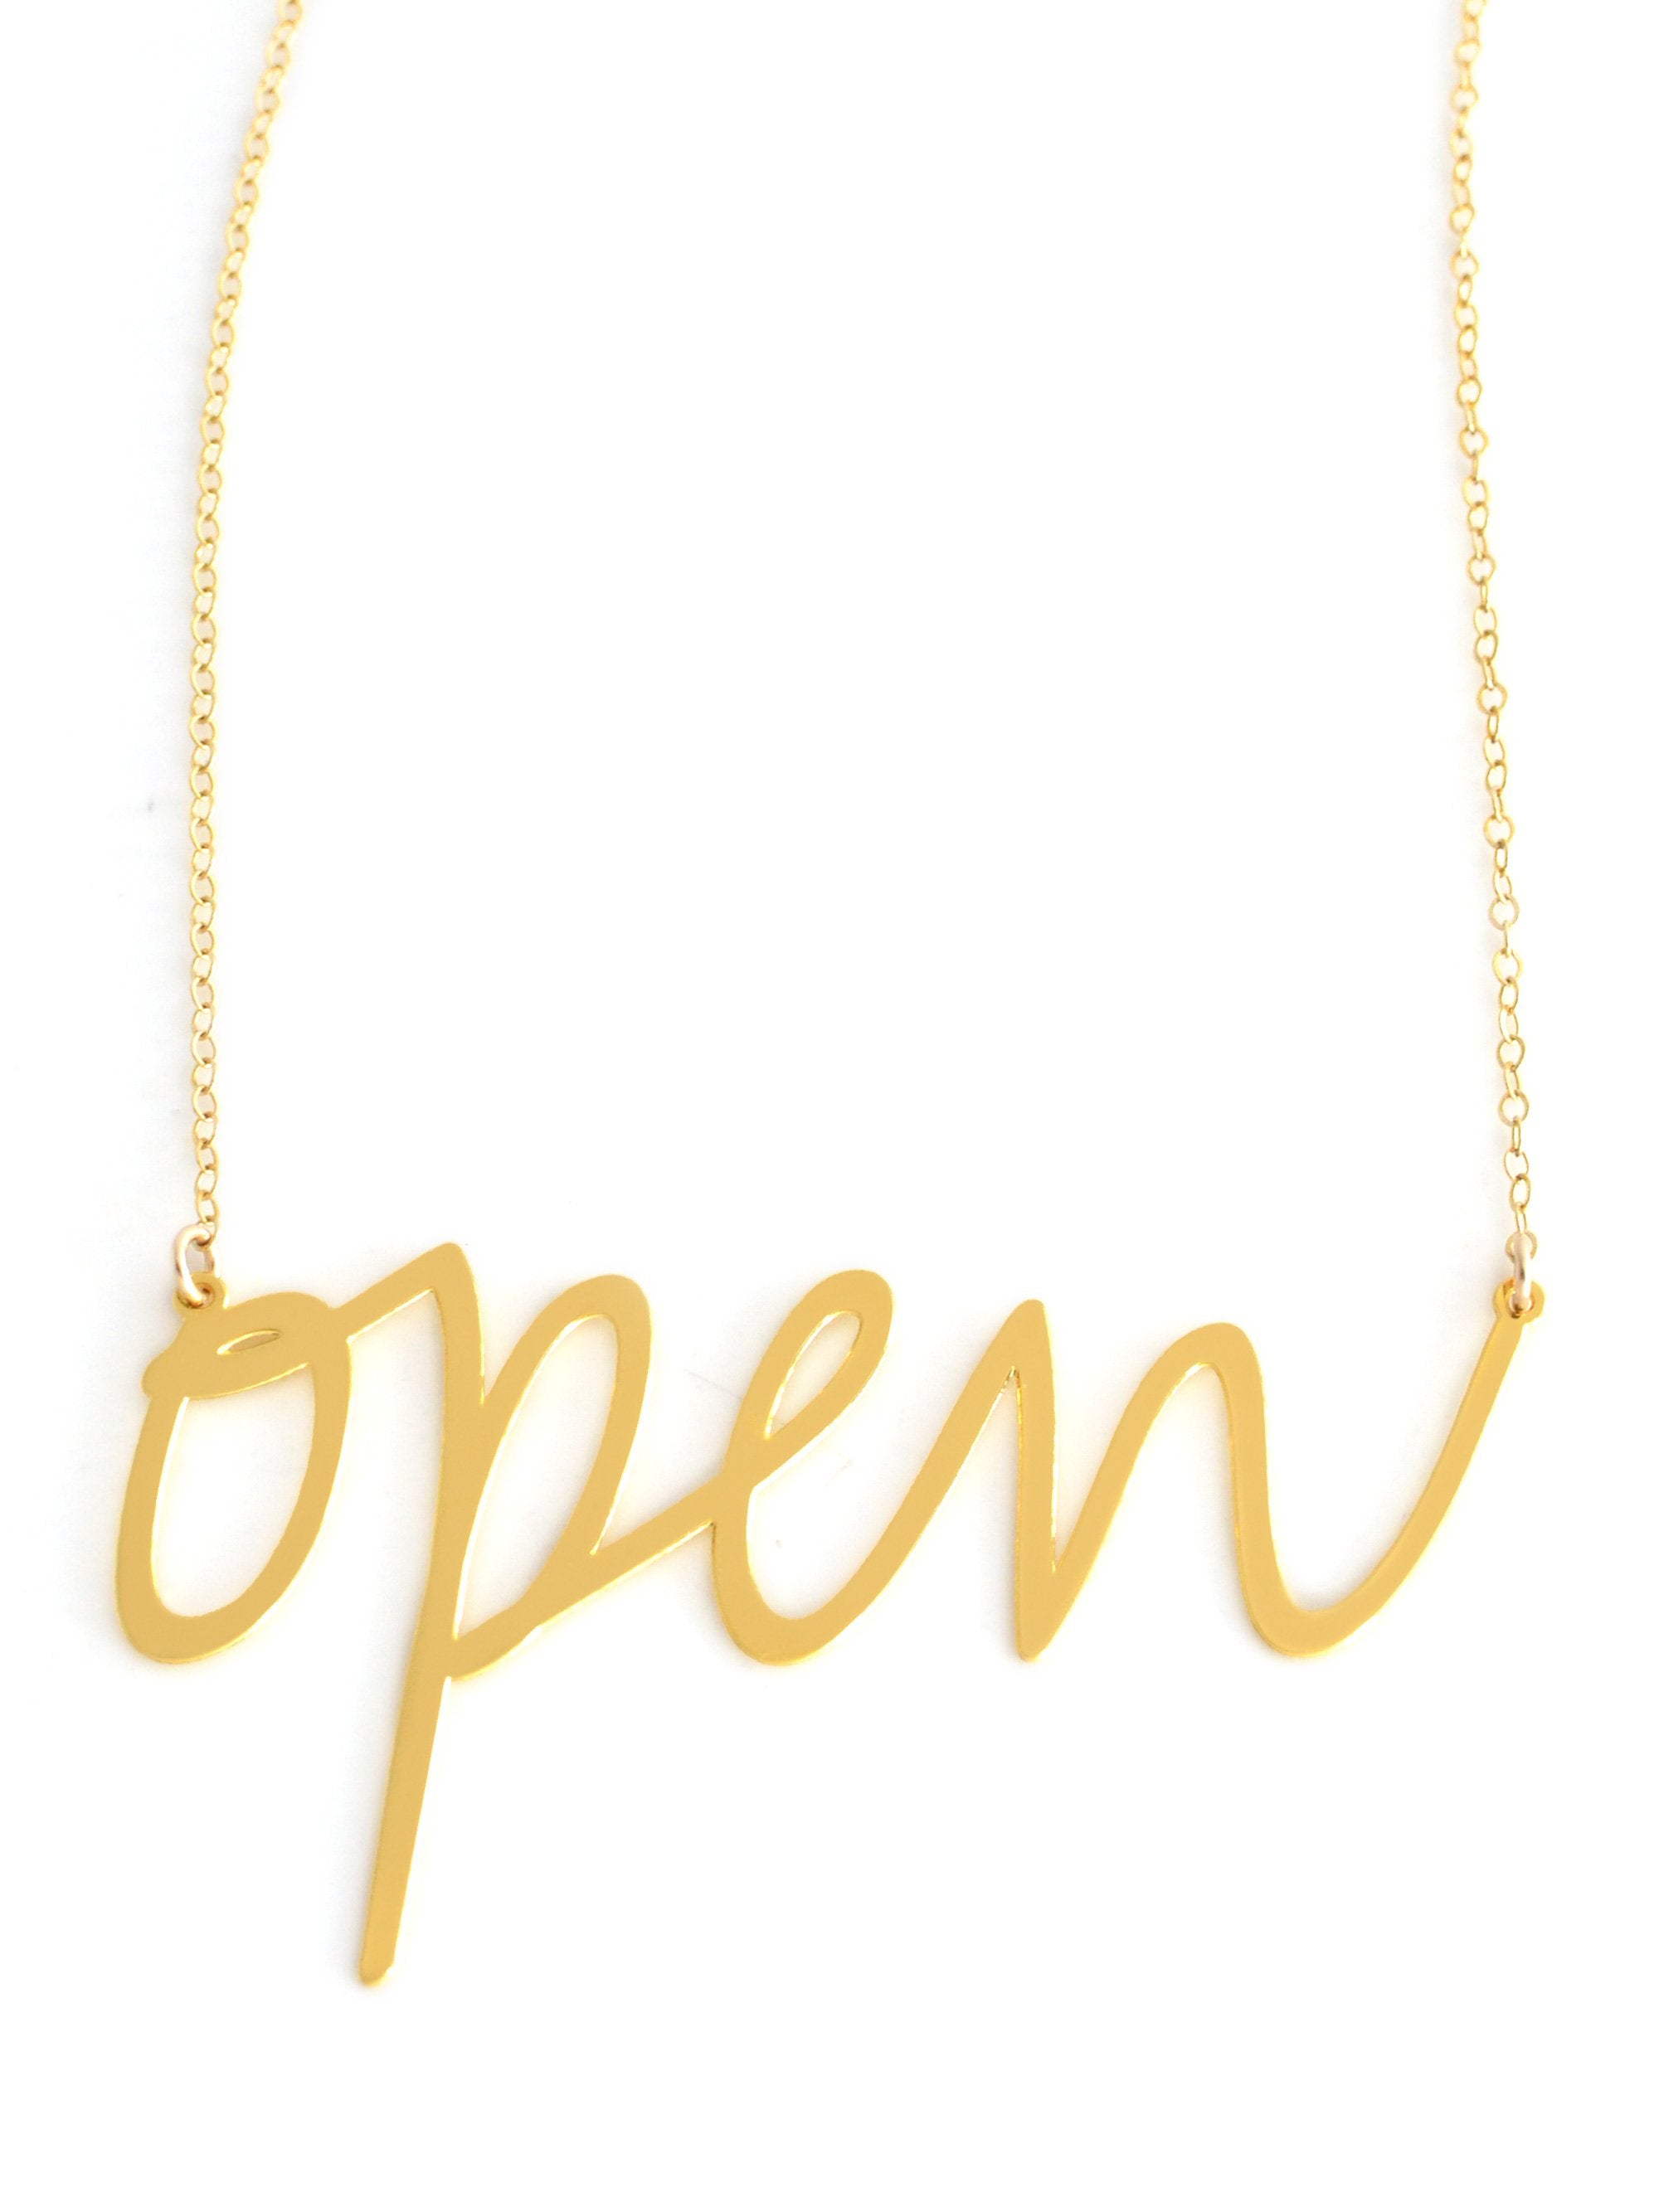 Open Necklace - High Quality, Affordable, Hand Written, Self Love, Mantra Word Necklace - Available in Gold and Silver - Small and Large Sizes - Made in USA - Brevity Jewelry